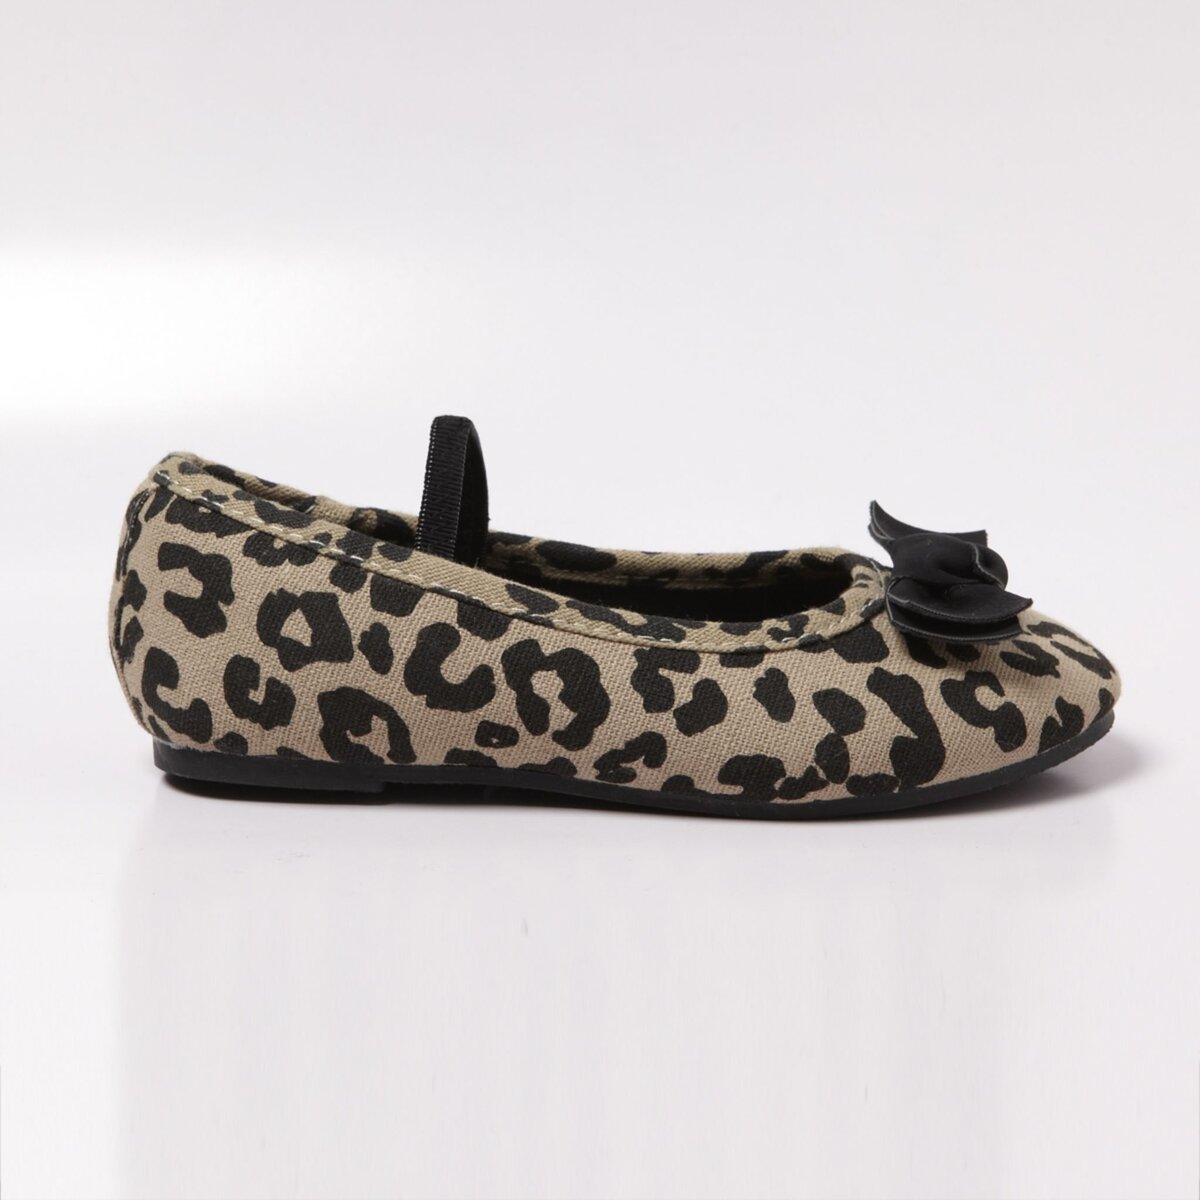 IN EXTENSO Ballerines fille